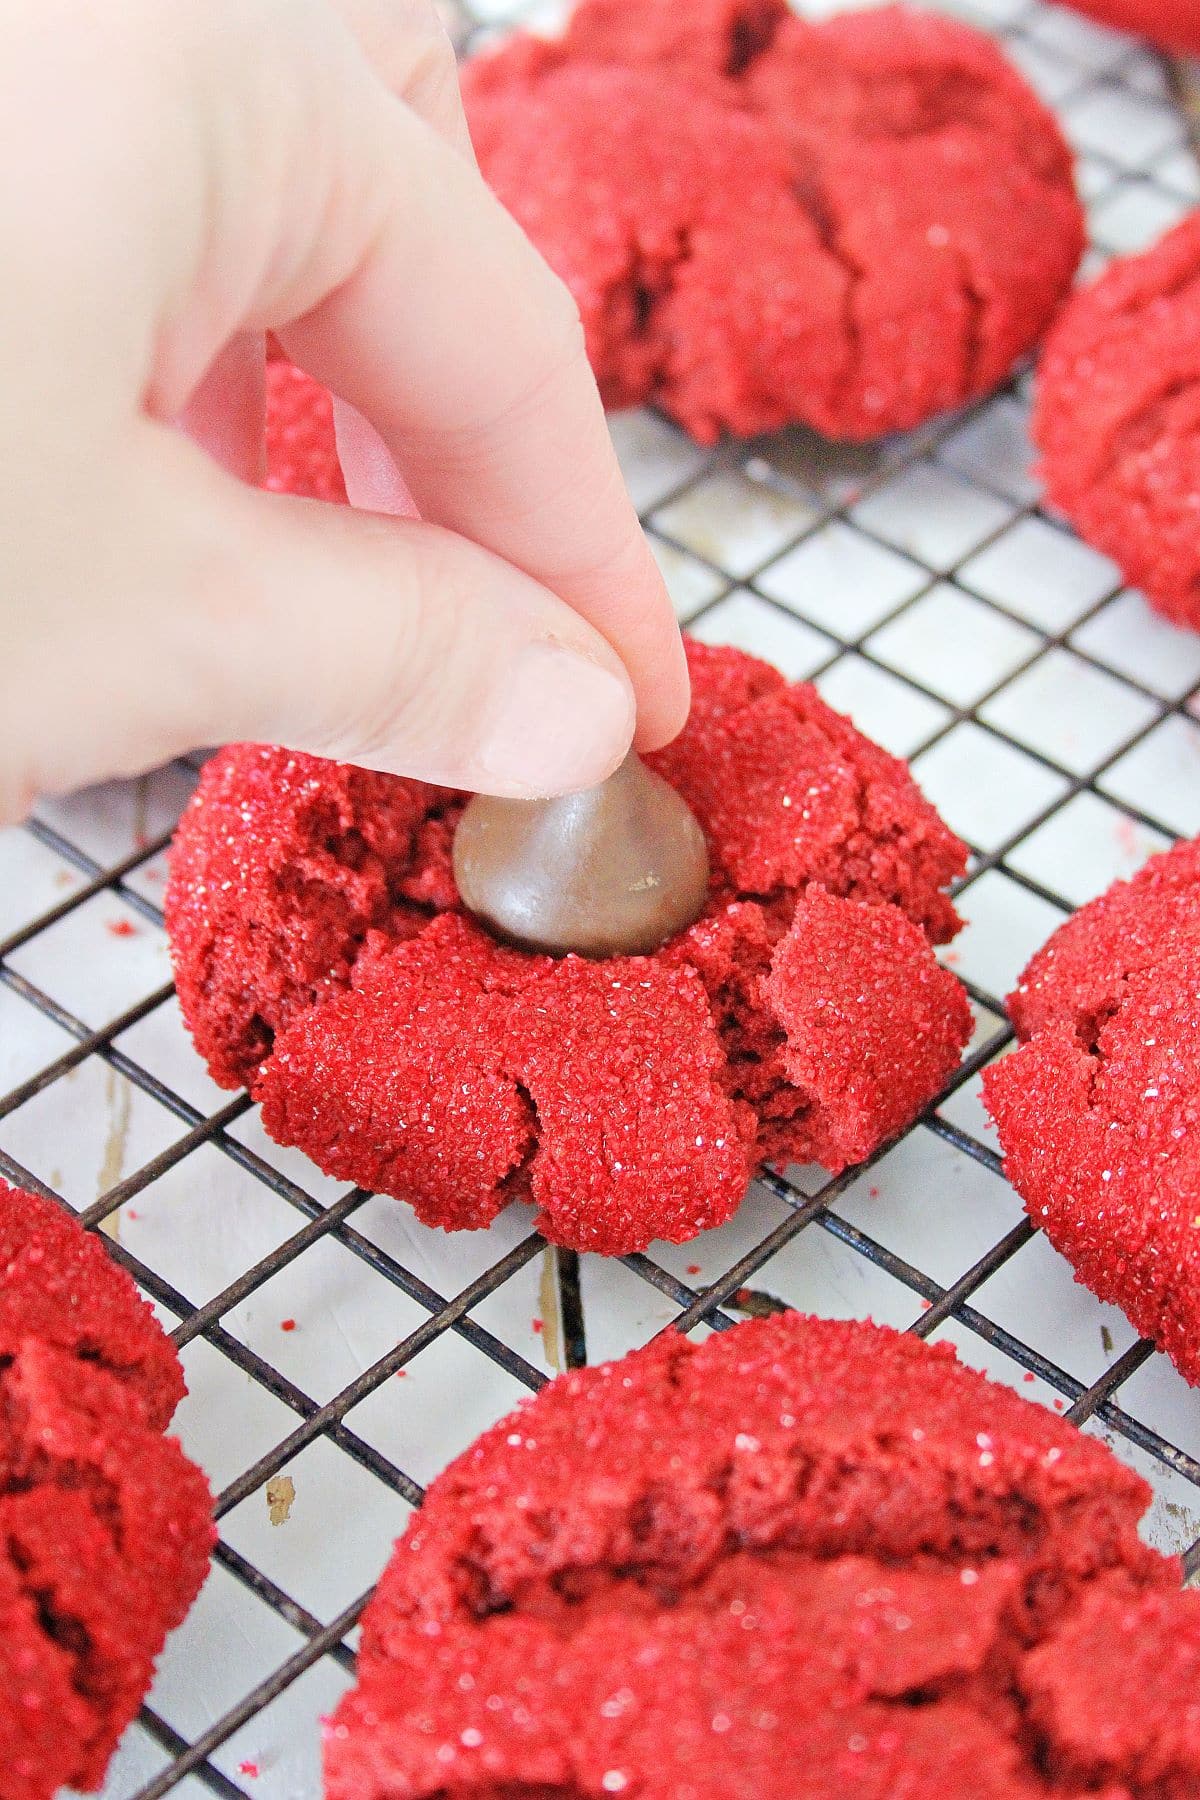 A hand placing a chocolate kiss in the center of a red velvet peanut butter cookie.